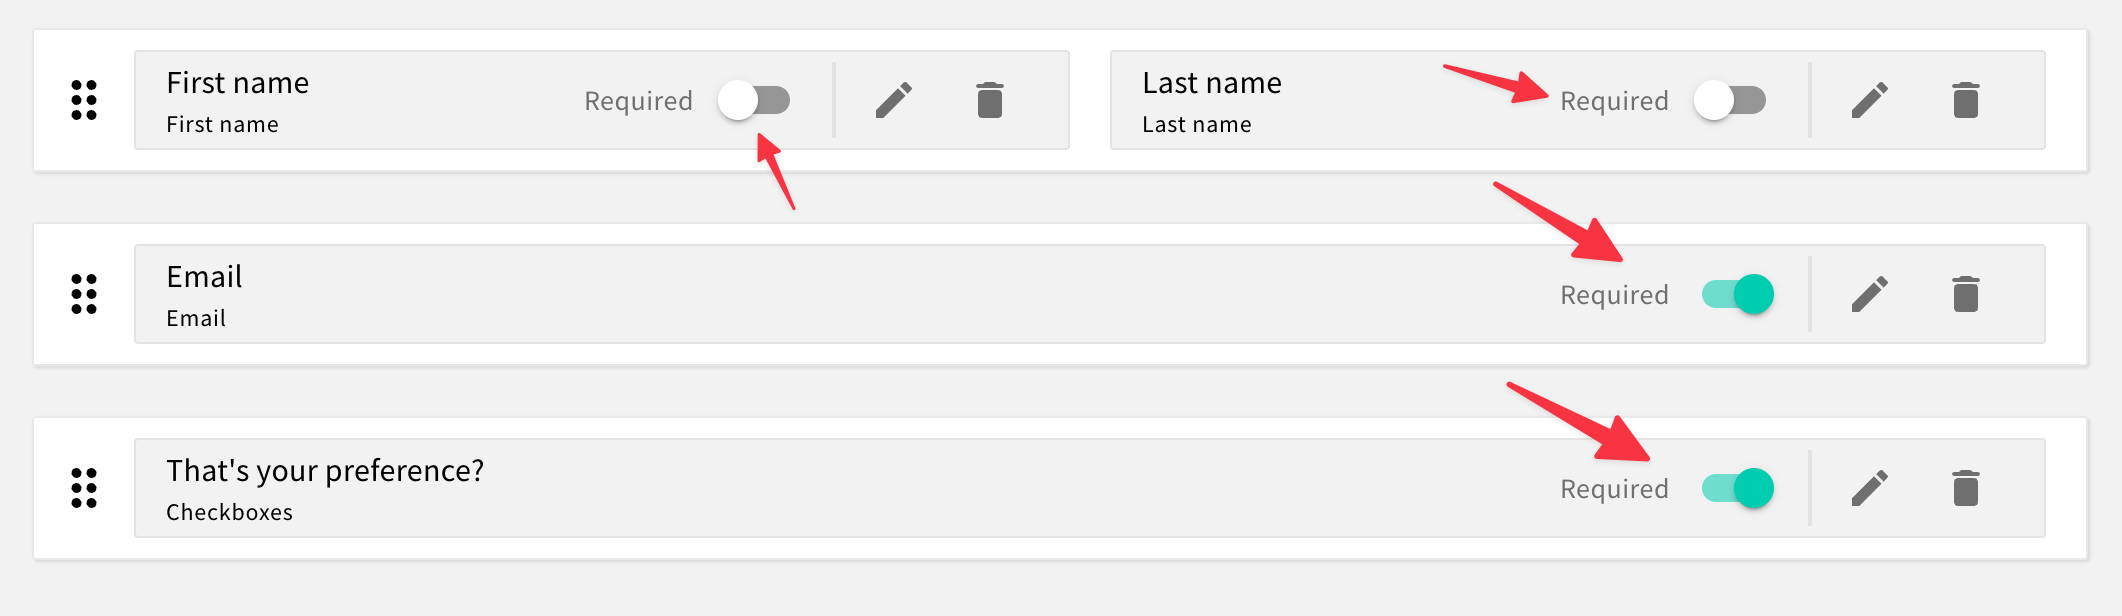 Form Builder - Required toggle